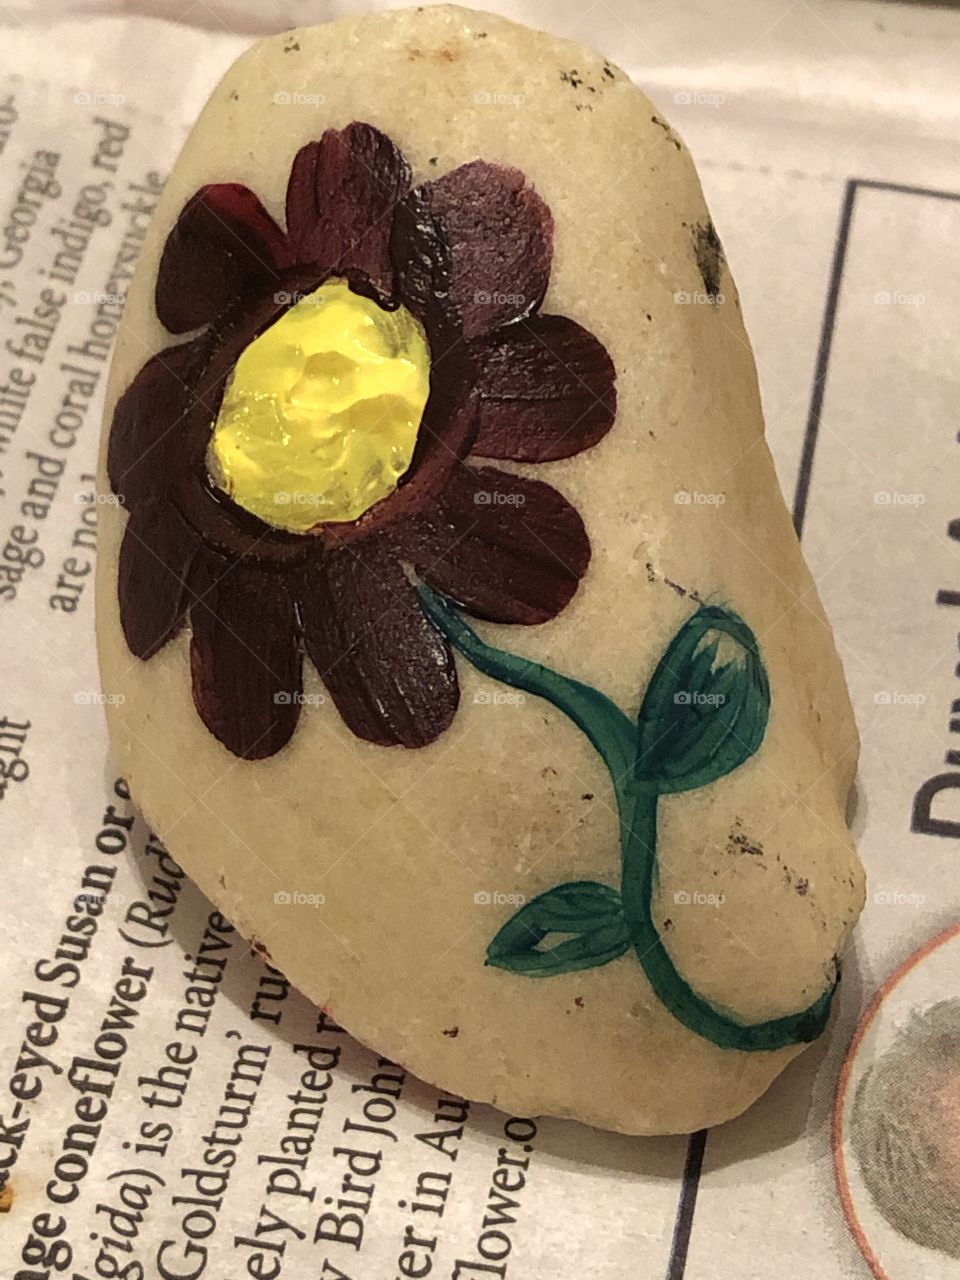 A painted rock